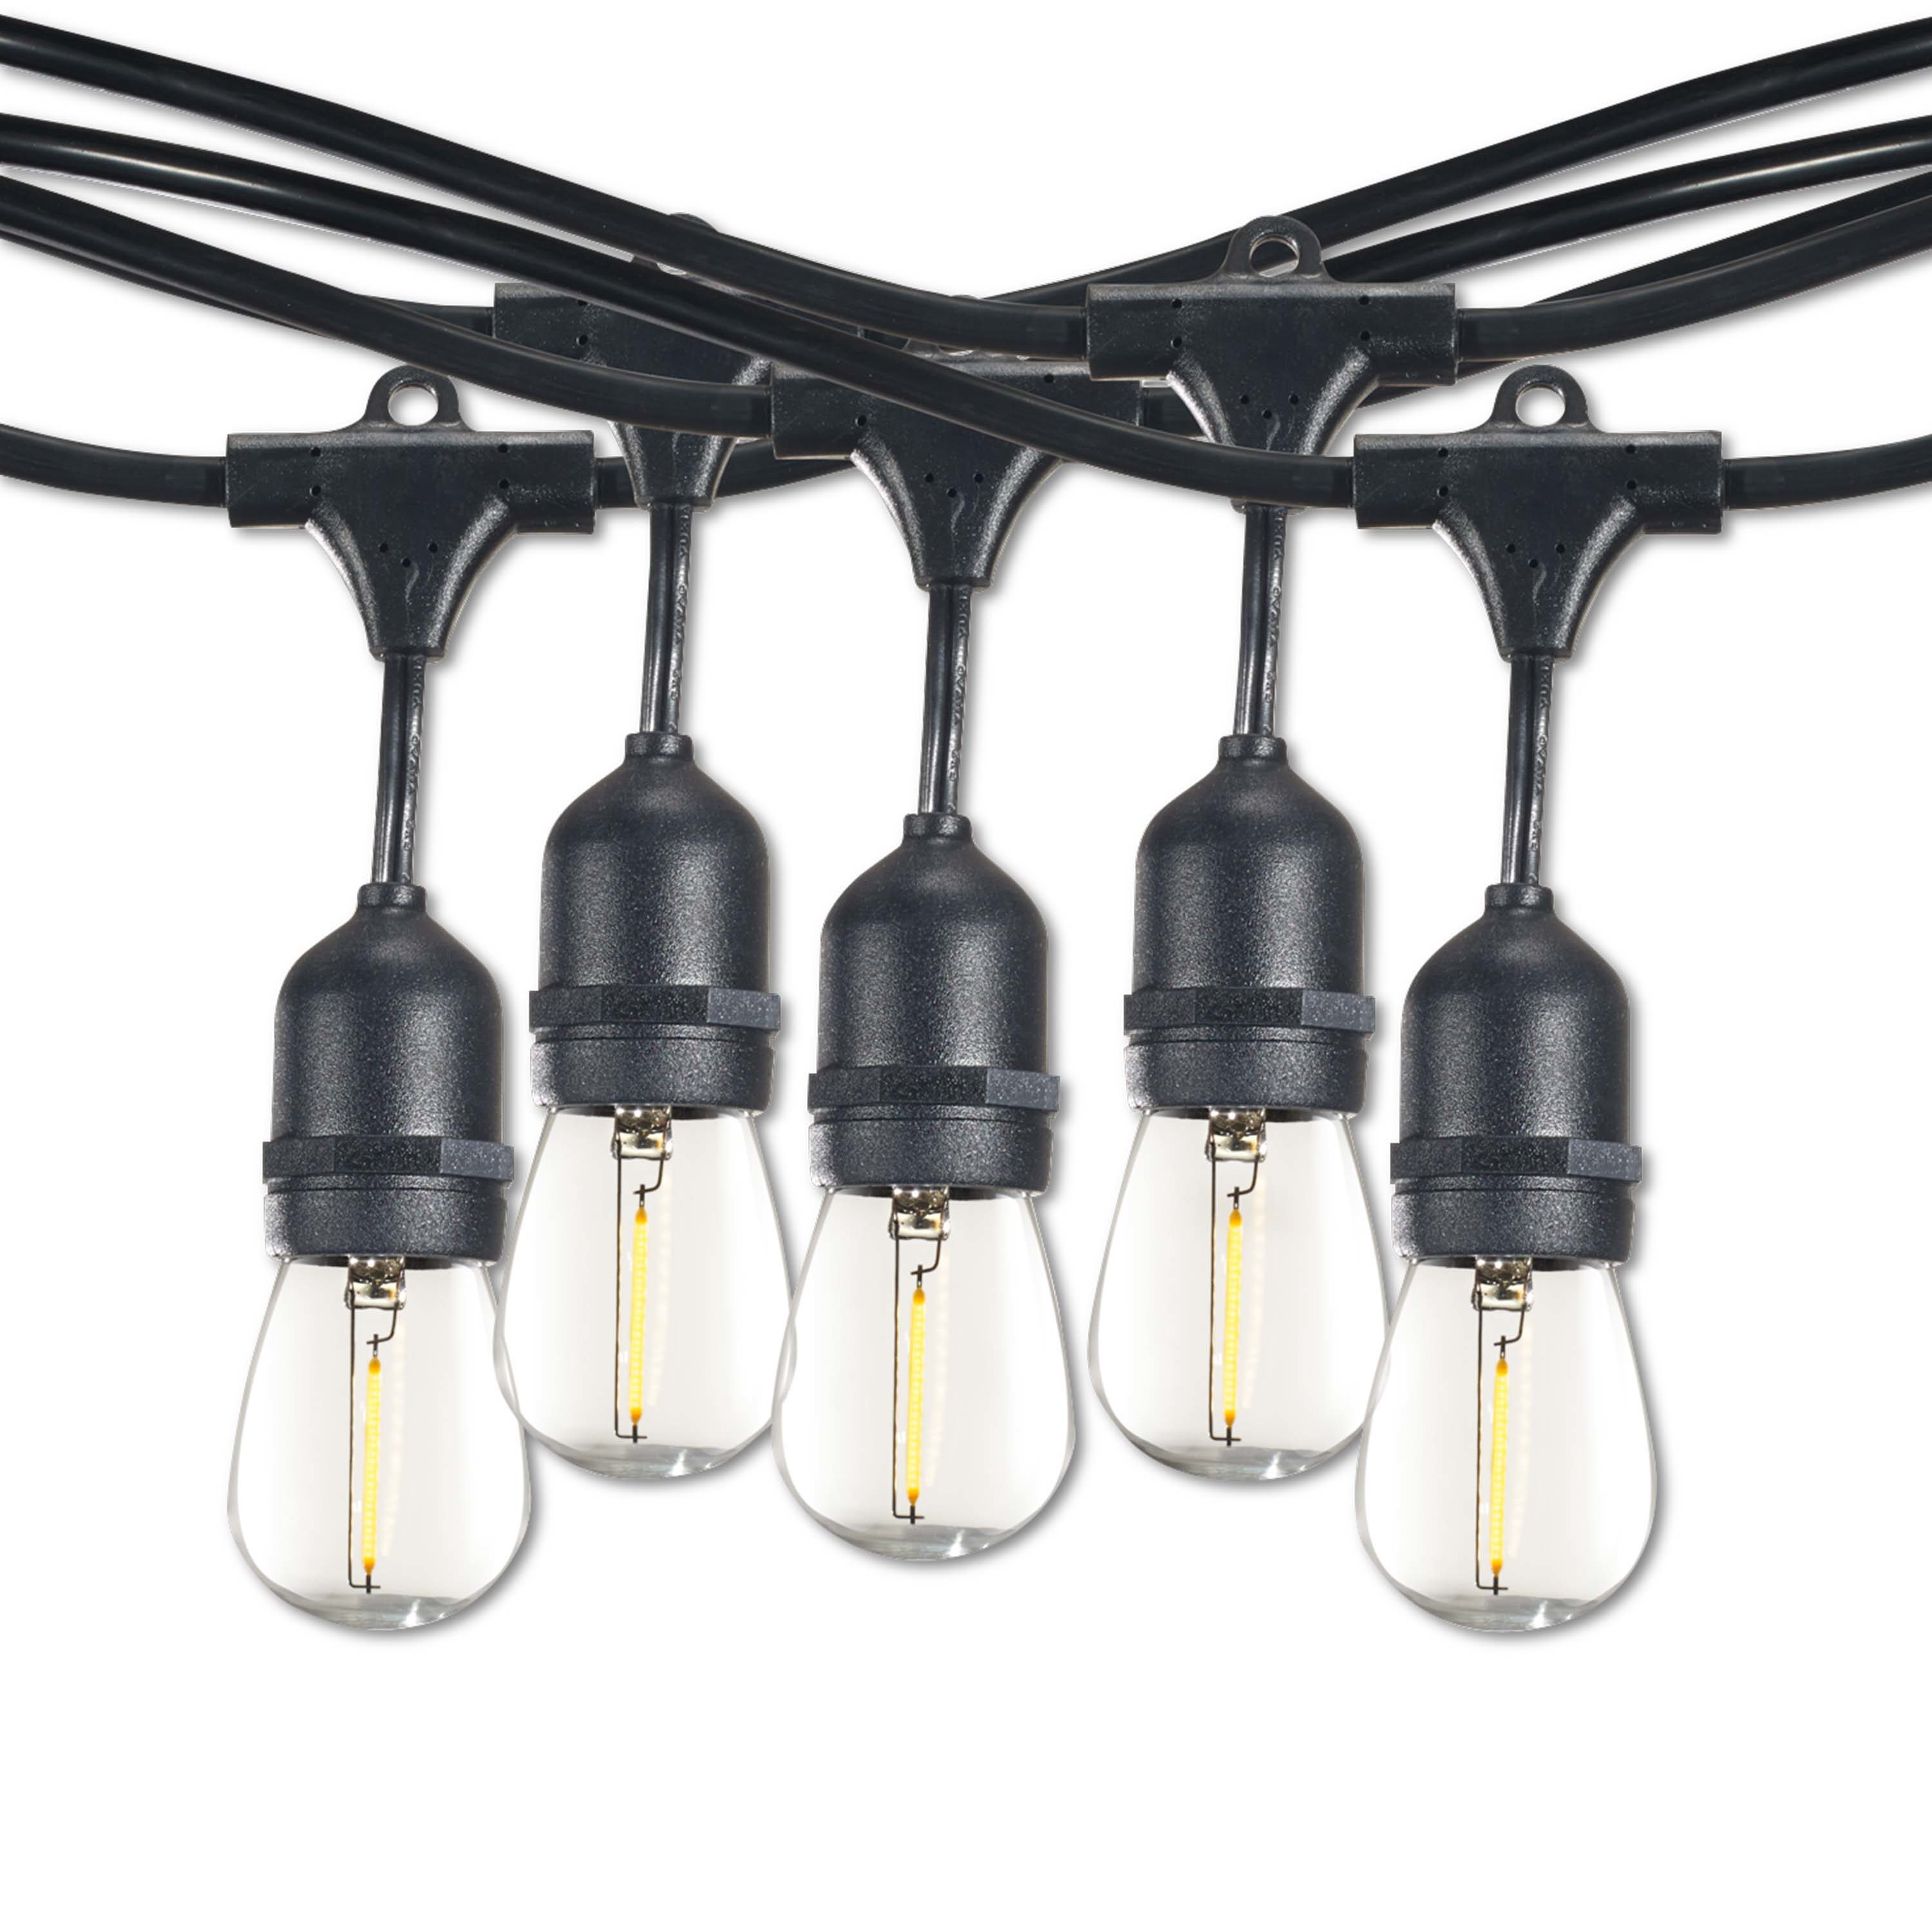 Newhouse Lighting Outdoor 48 ft. Plug-In S14 Edison Bulb LED